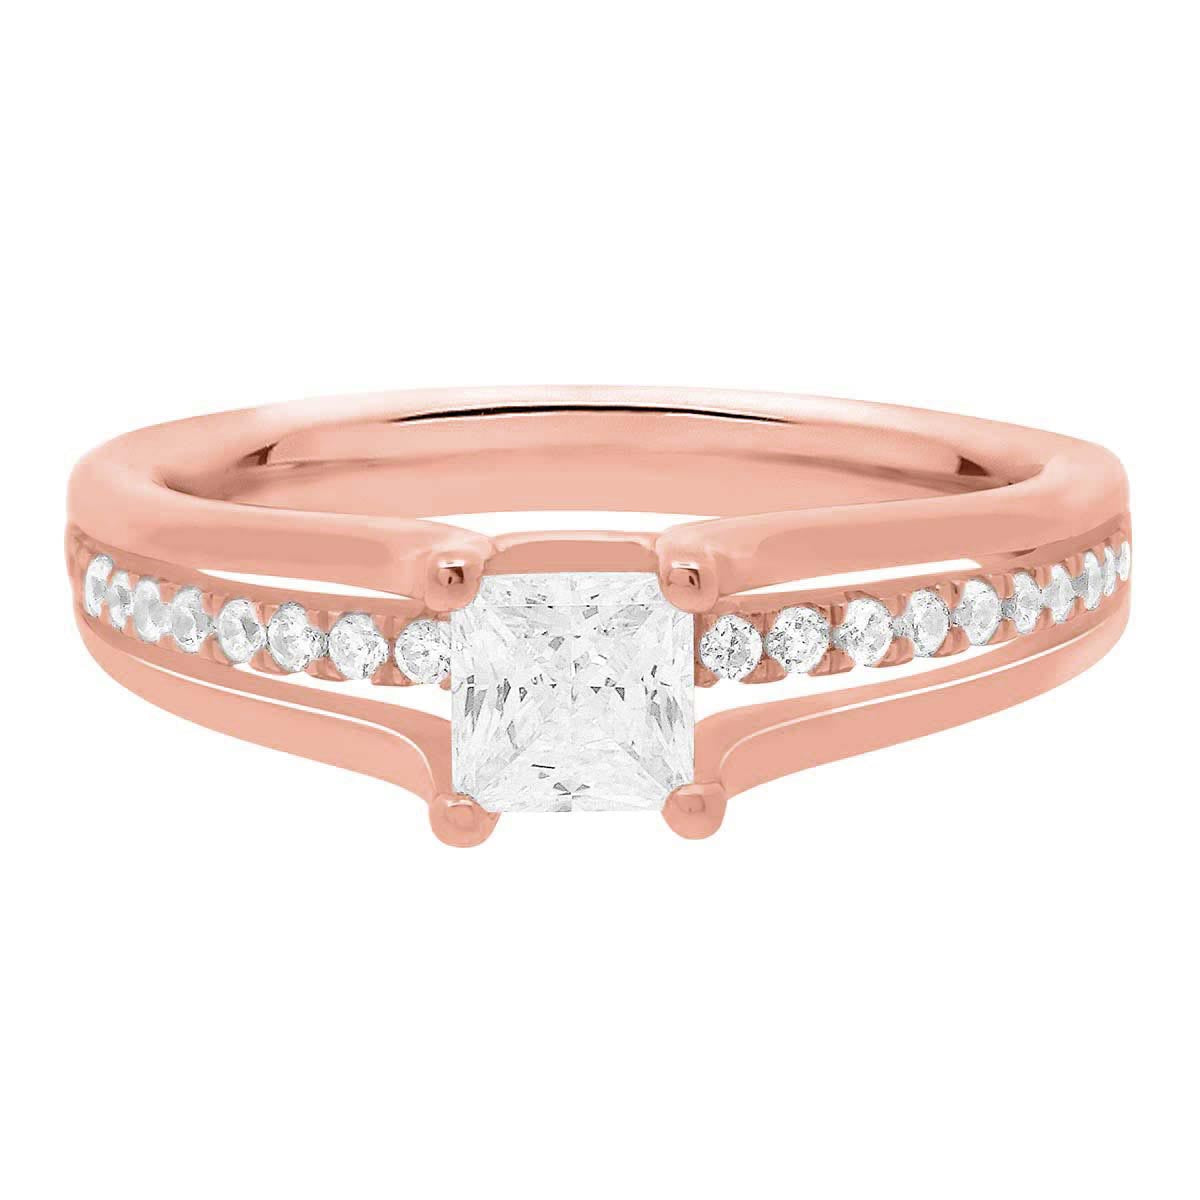 Princess Cut Diamond Engagement Ring made in rose gold